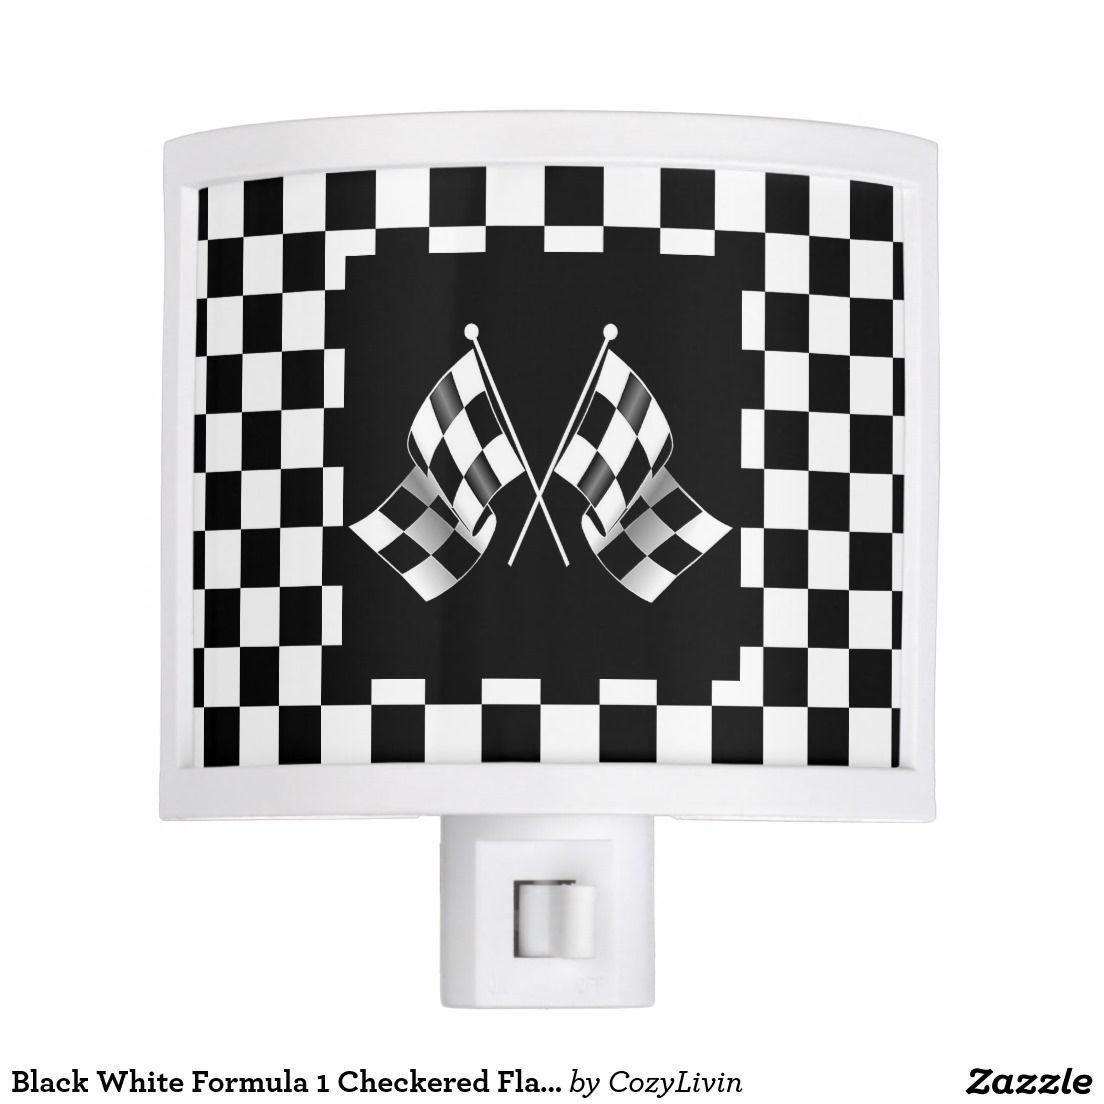 Black and White Checkerboard Logo - Cool Black White Formula 1 Checkered Flags Pattern Night Light in ...